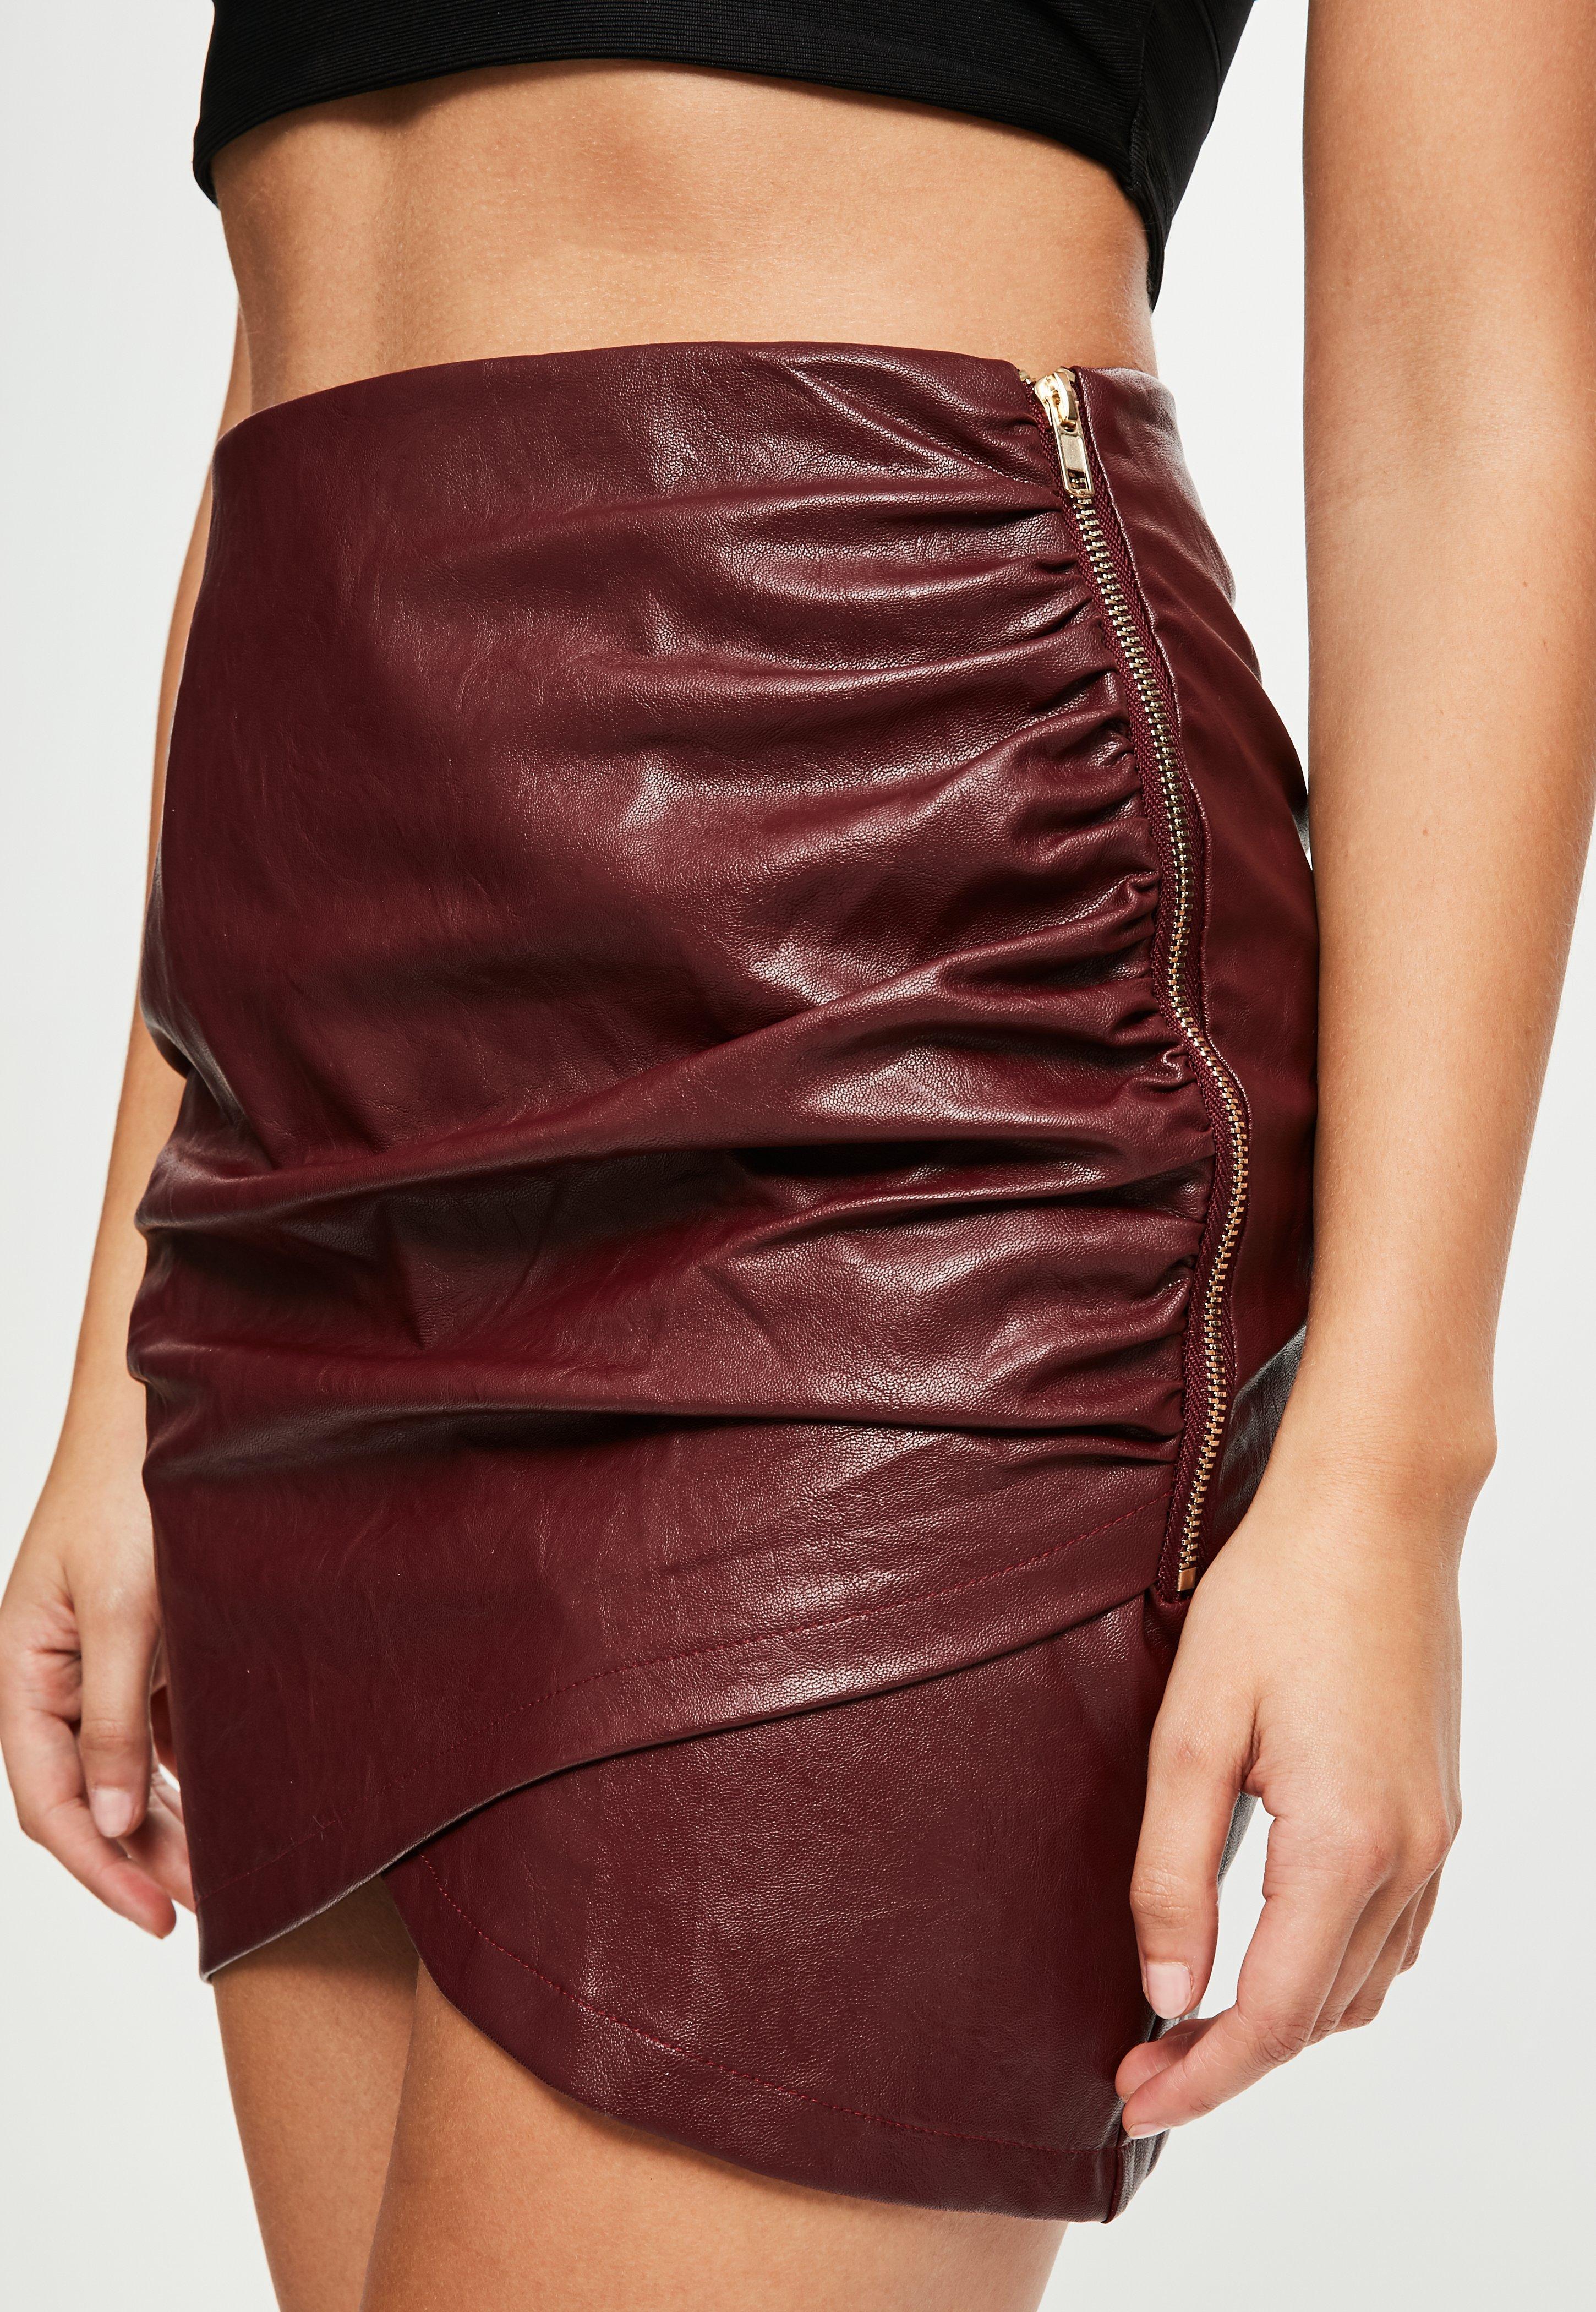 Lyst - Missguided Burgundy Faux Leather Wrap Skirt